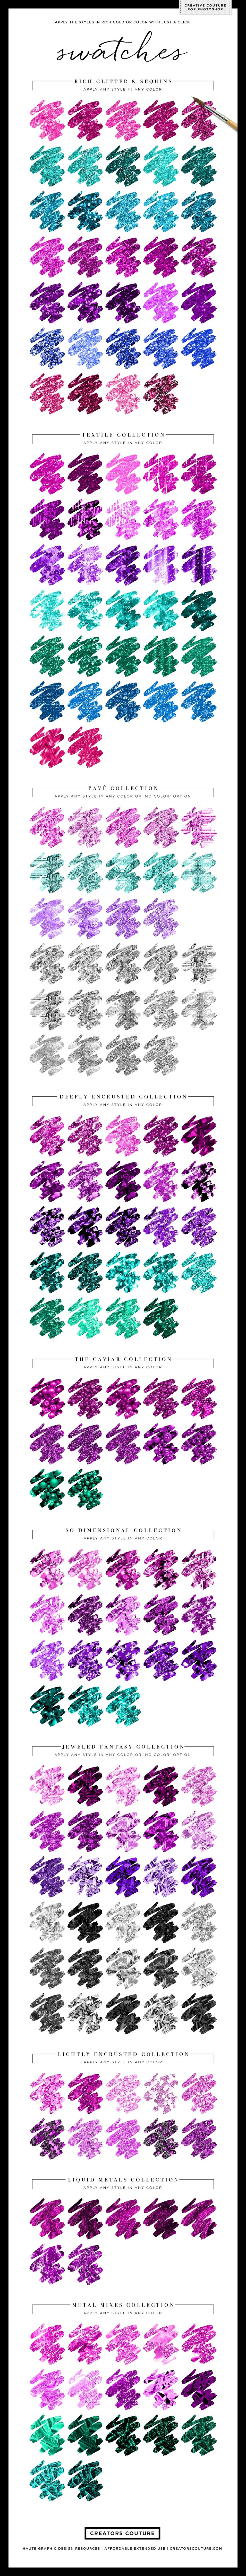 creative couture swatches ps 887